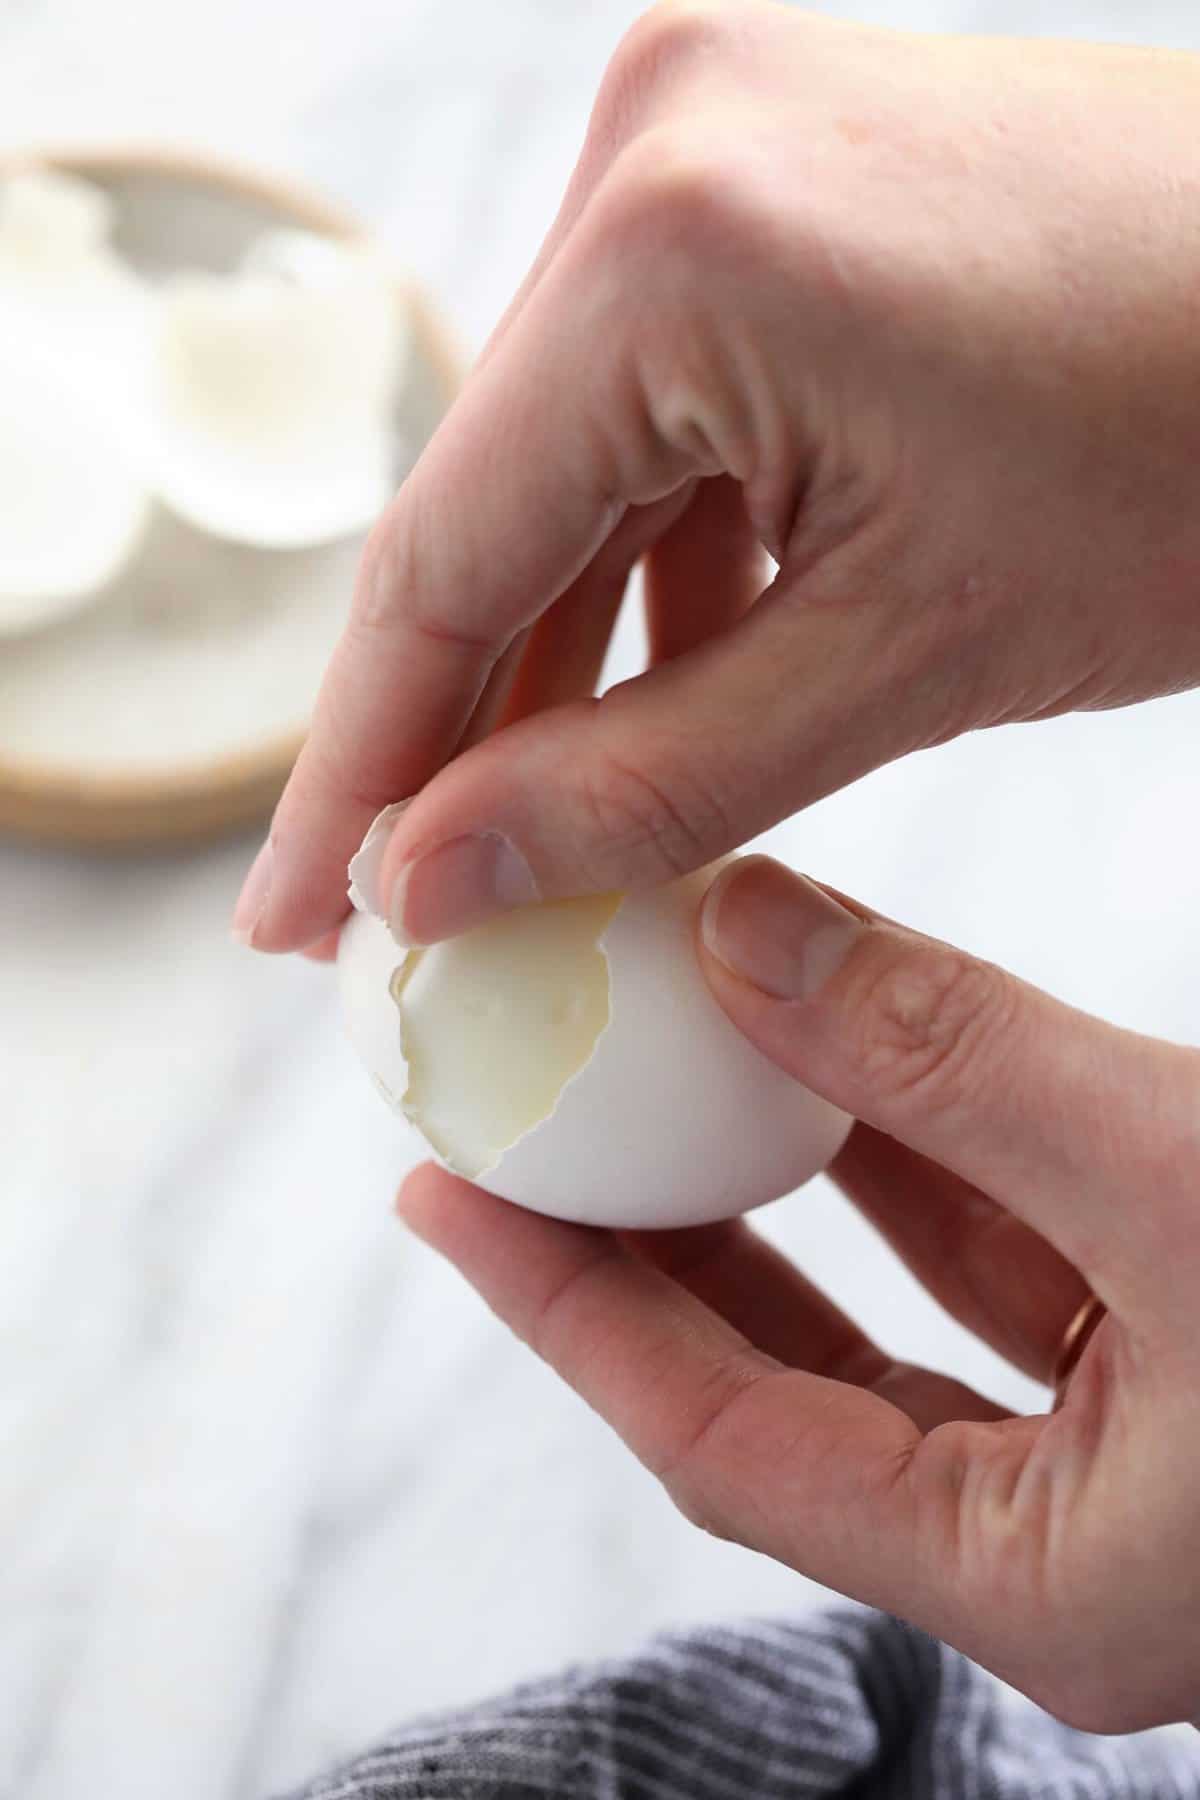 How to Make Perfect Hard Boiled Eggs - Oh Sweet Basil